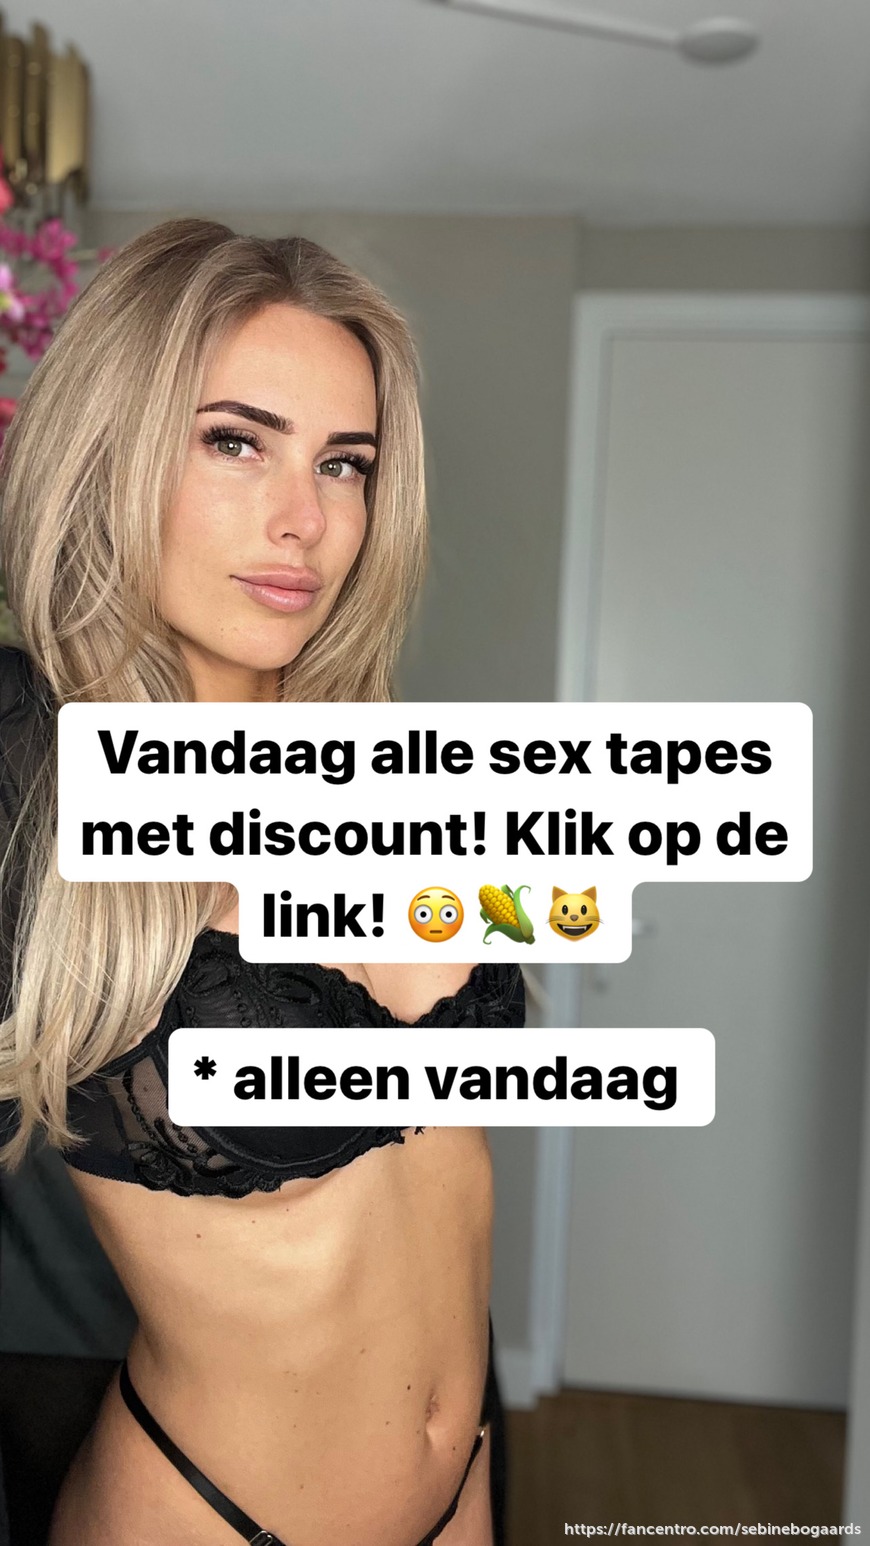 Alle sex tapes 😳🌽👉